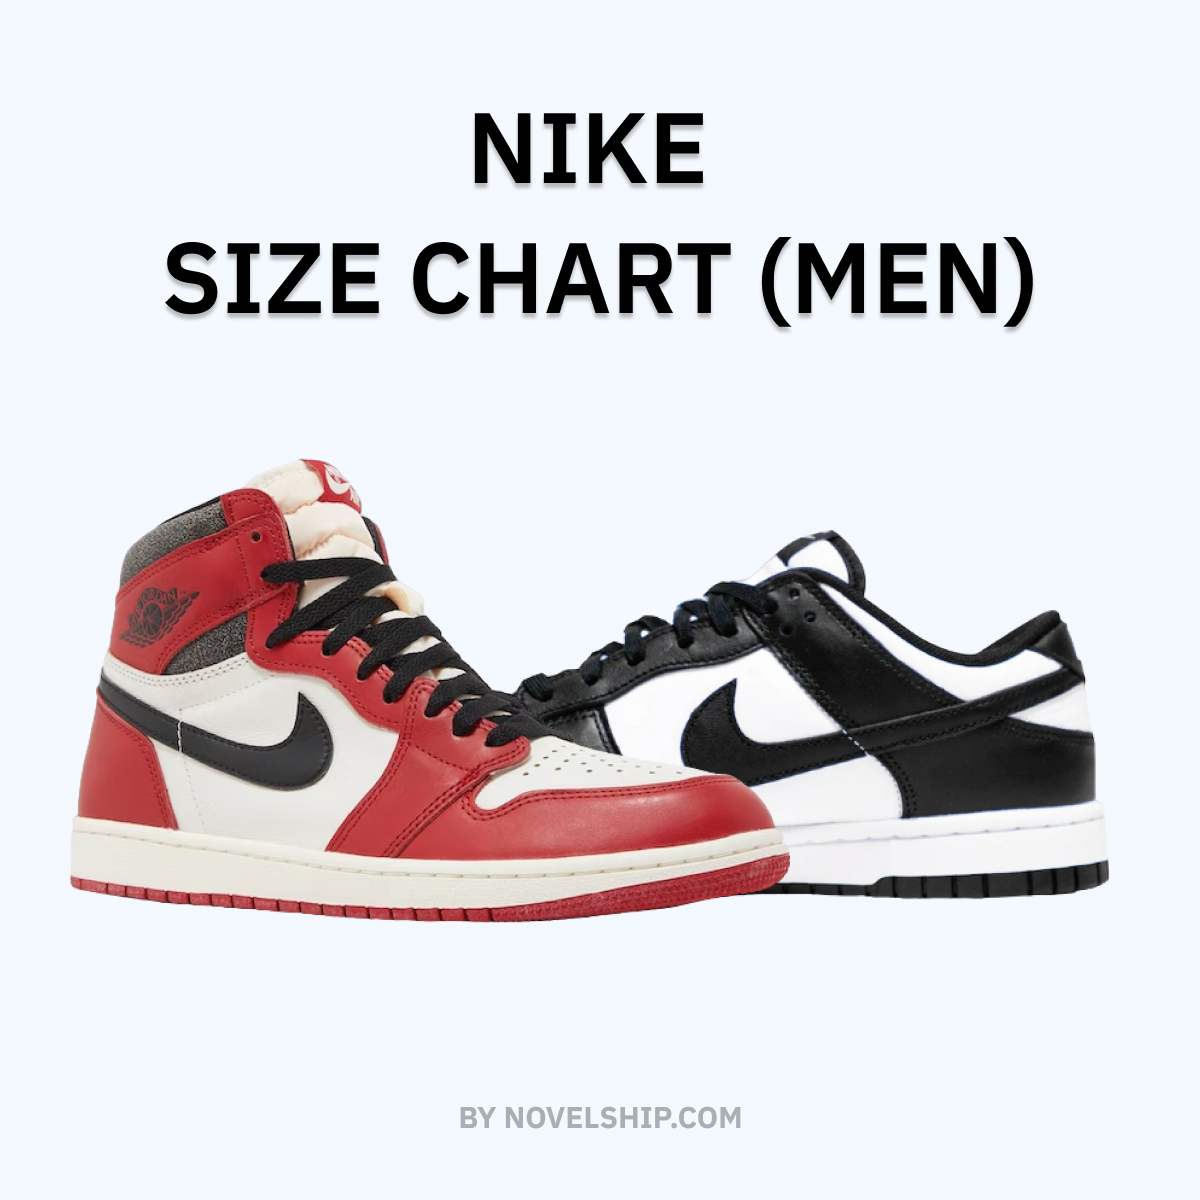 Incompatible Tortuga líder Nike Men's Sneakers Size Chart: Find Your Perfect Fit - Novelship News